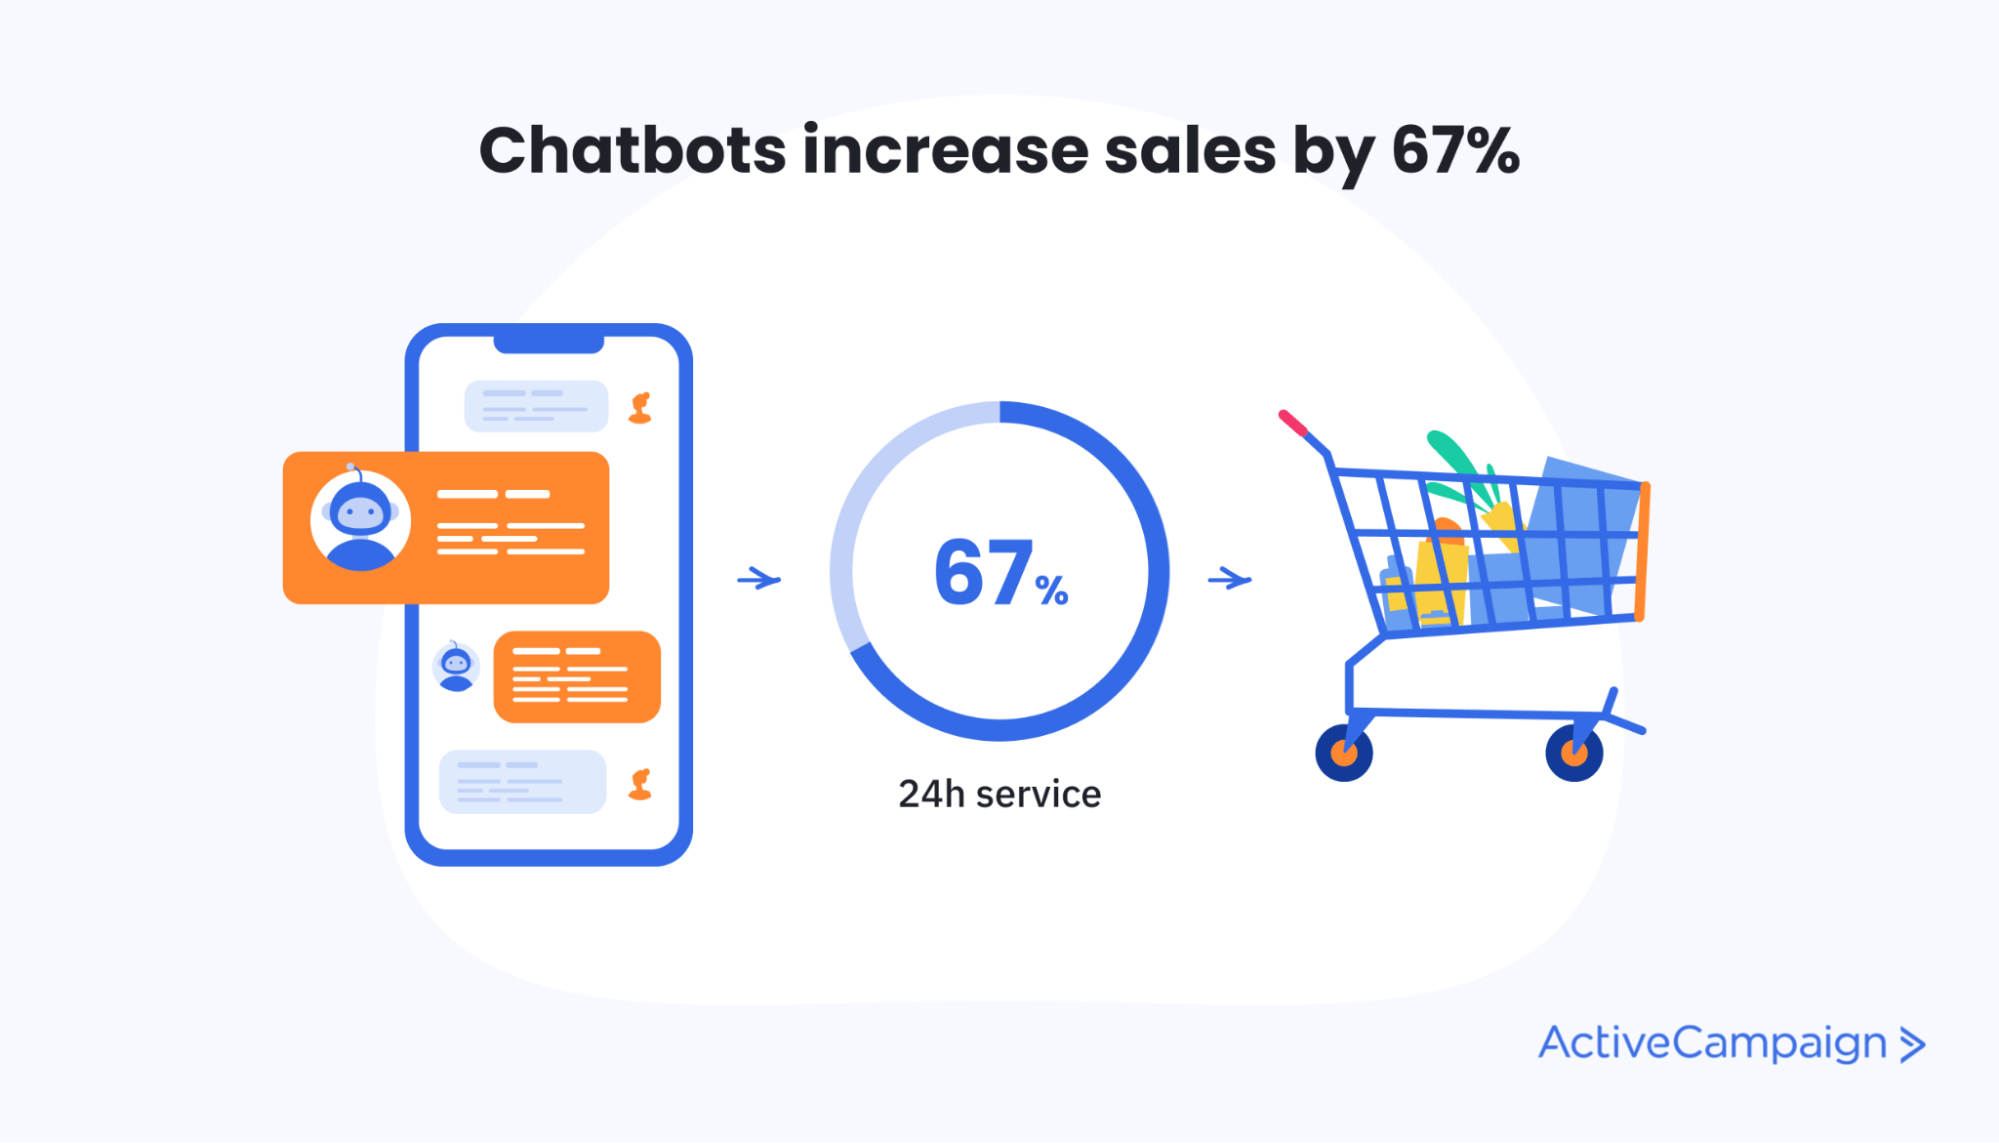 Chatbots increase sales by 67%